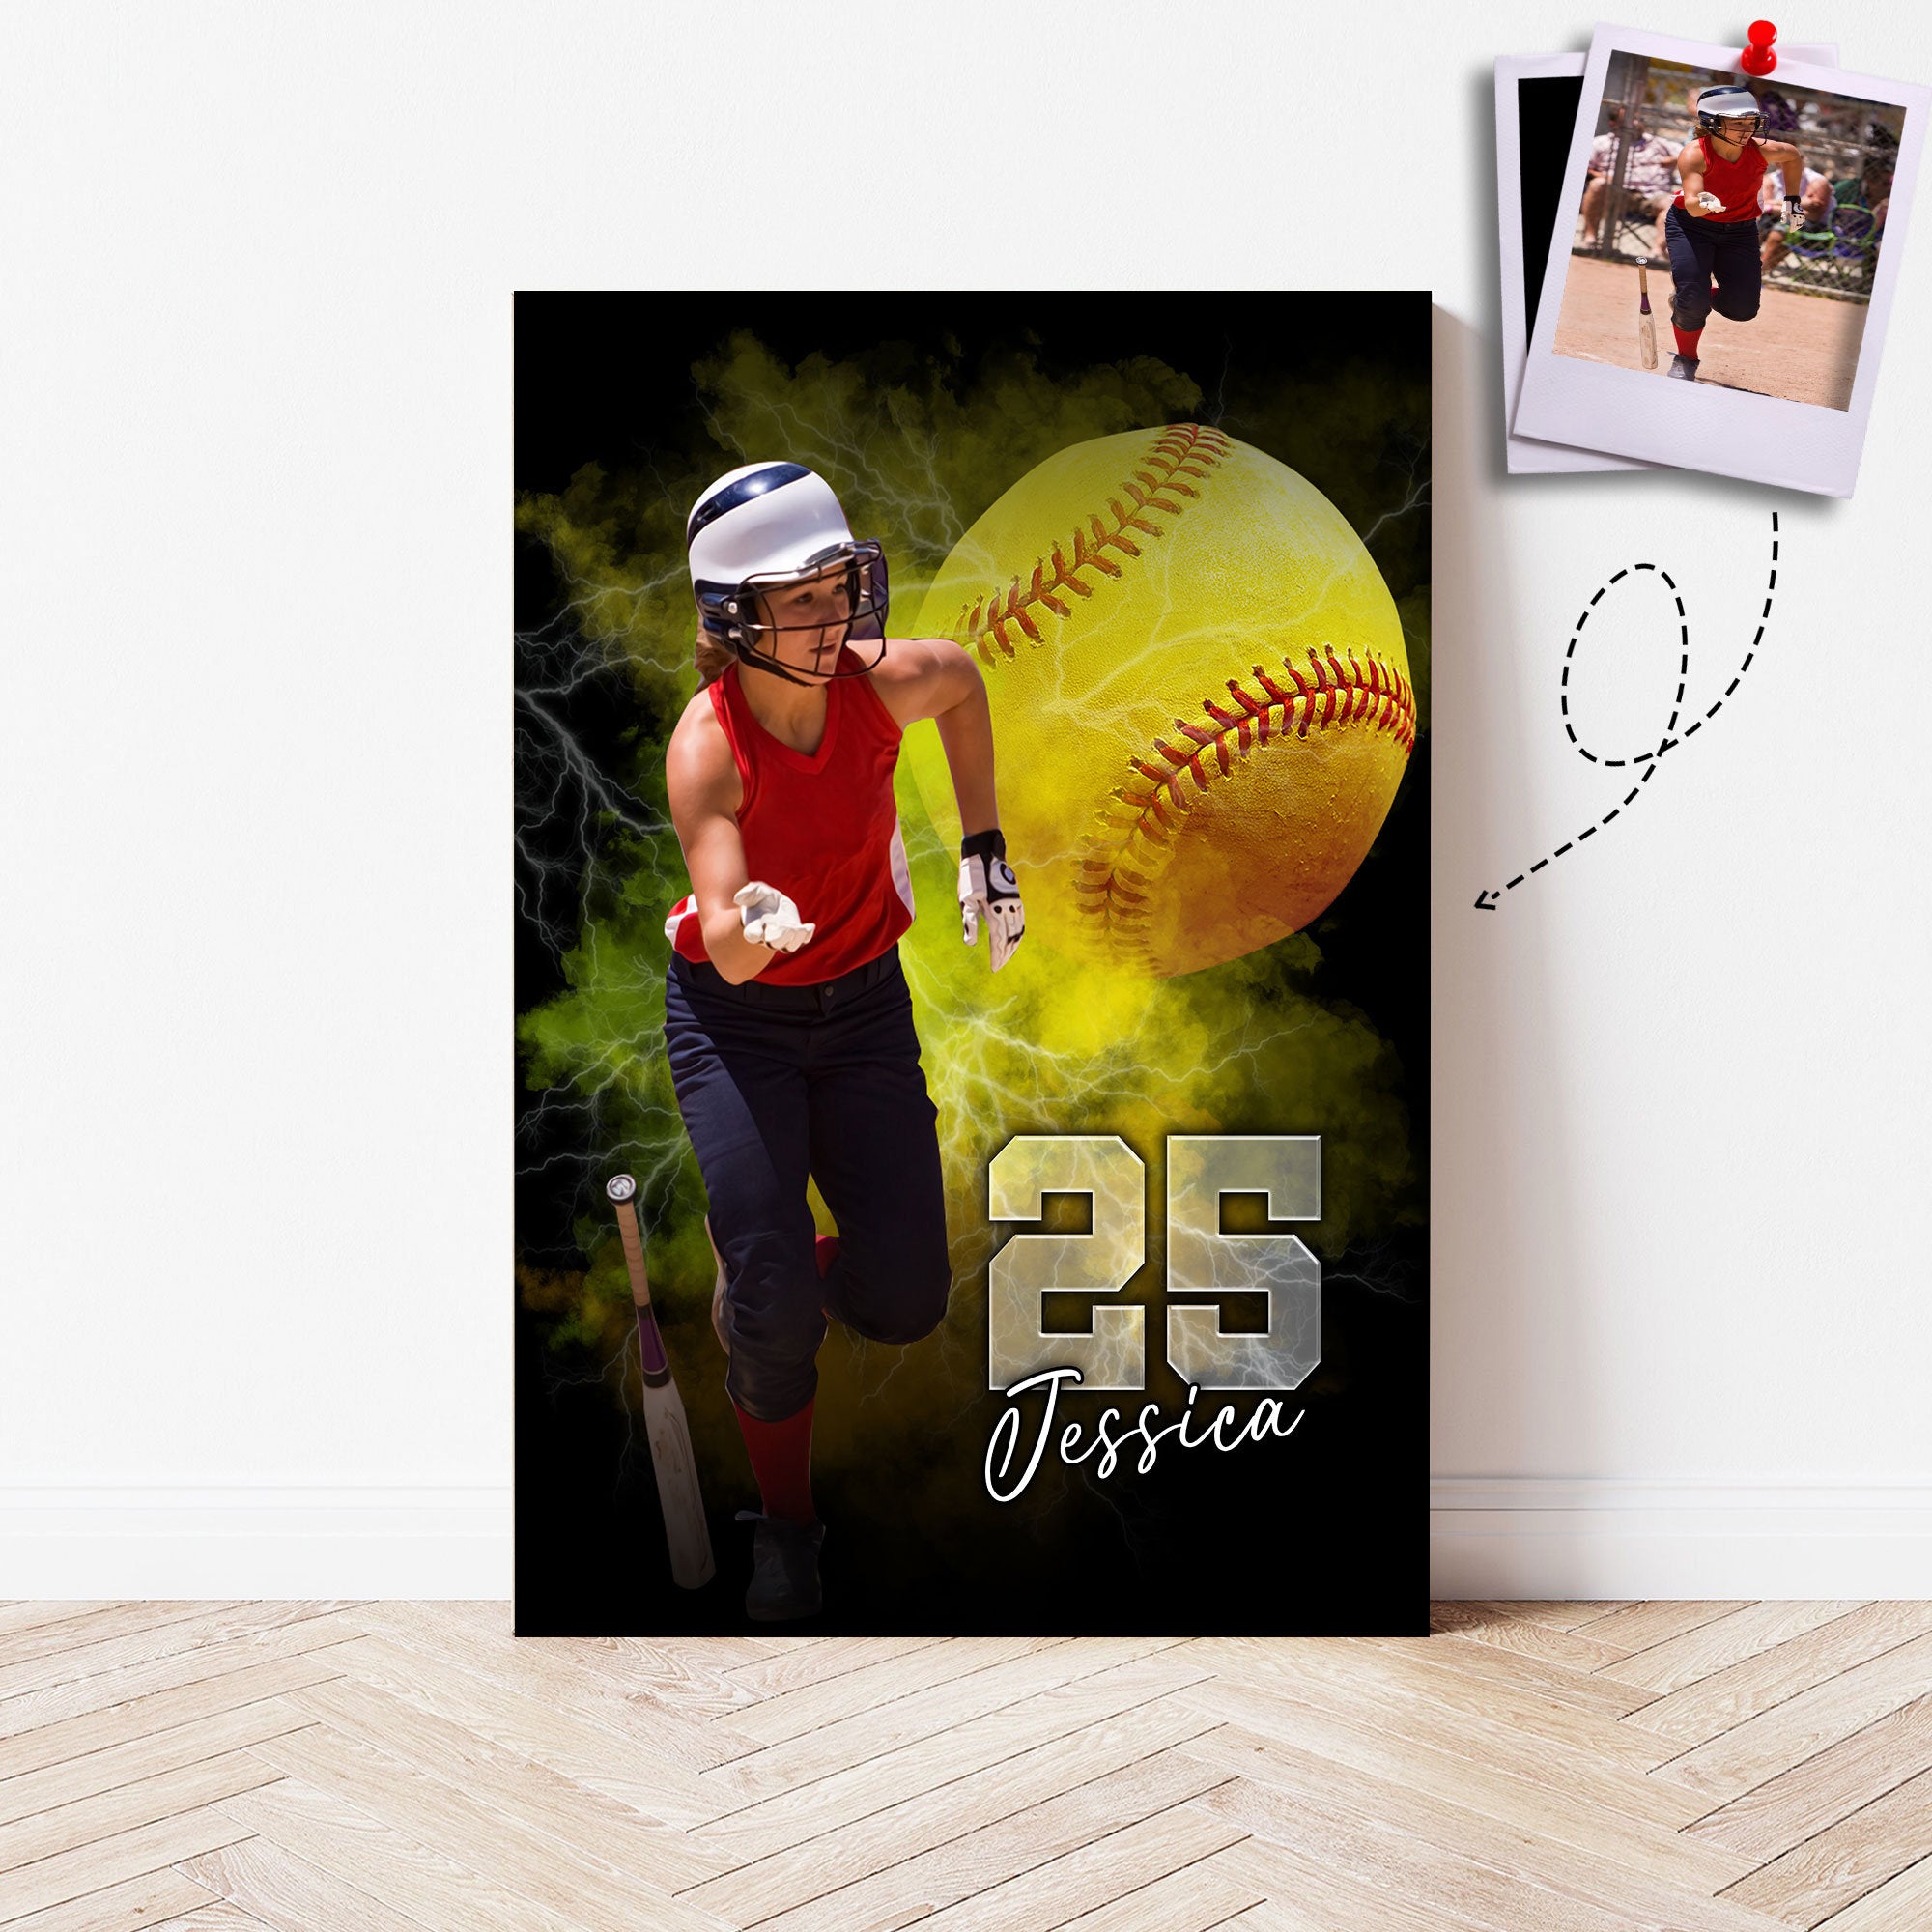 Personalized Photo Softball Poster/Canvas, Custom Photo Wall Art Print, Sport Framed Canvas, Softball Gift for Mom, Girlfriend, Daughter